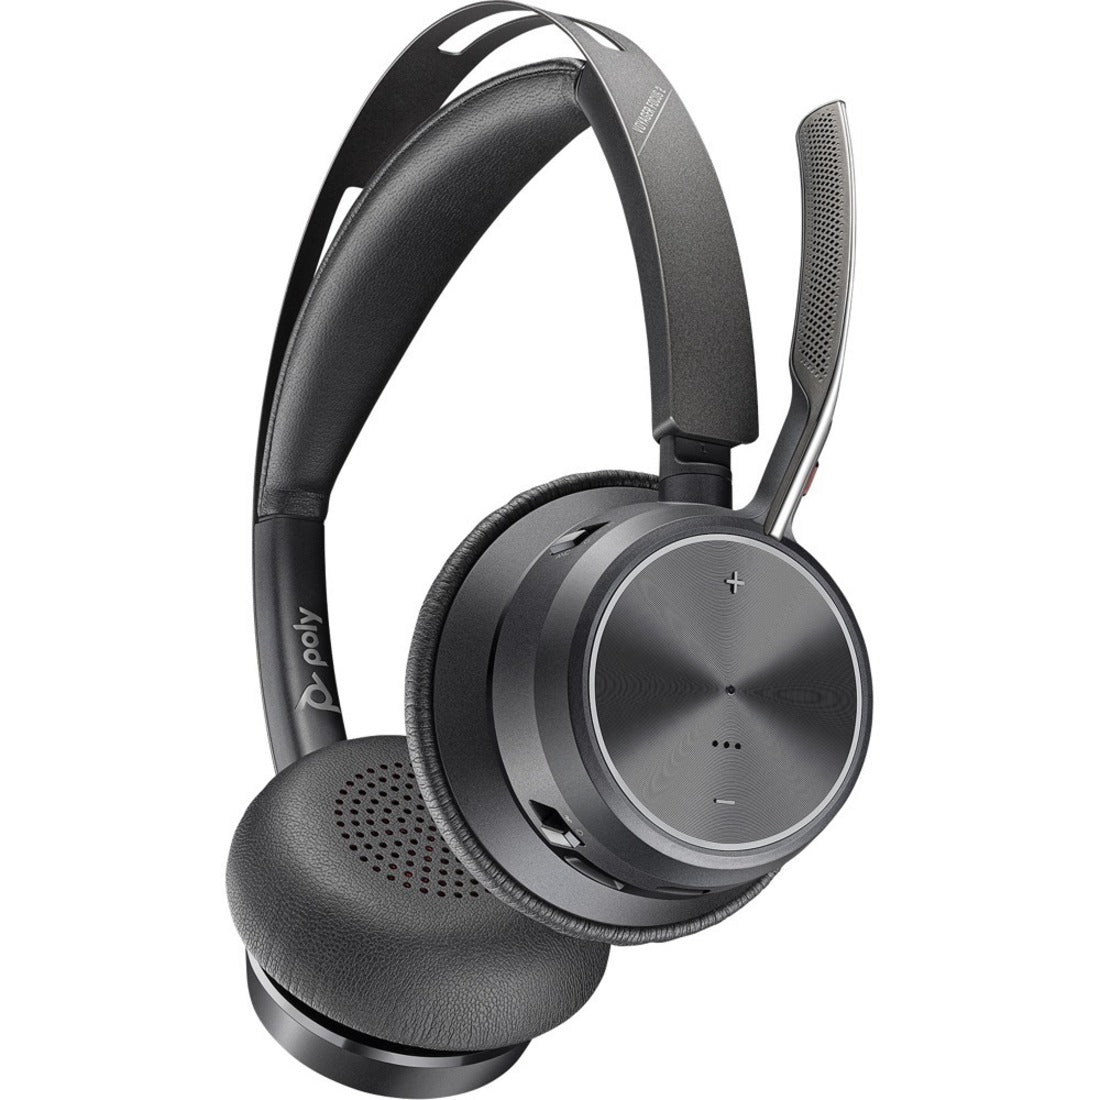 Poly 214432-02 Voyager Focus 2 Headset, Wireless Bluetooth Stereo Headphones with Noise Cancelling, Comfortable Design, and 2-Year Warranty